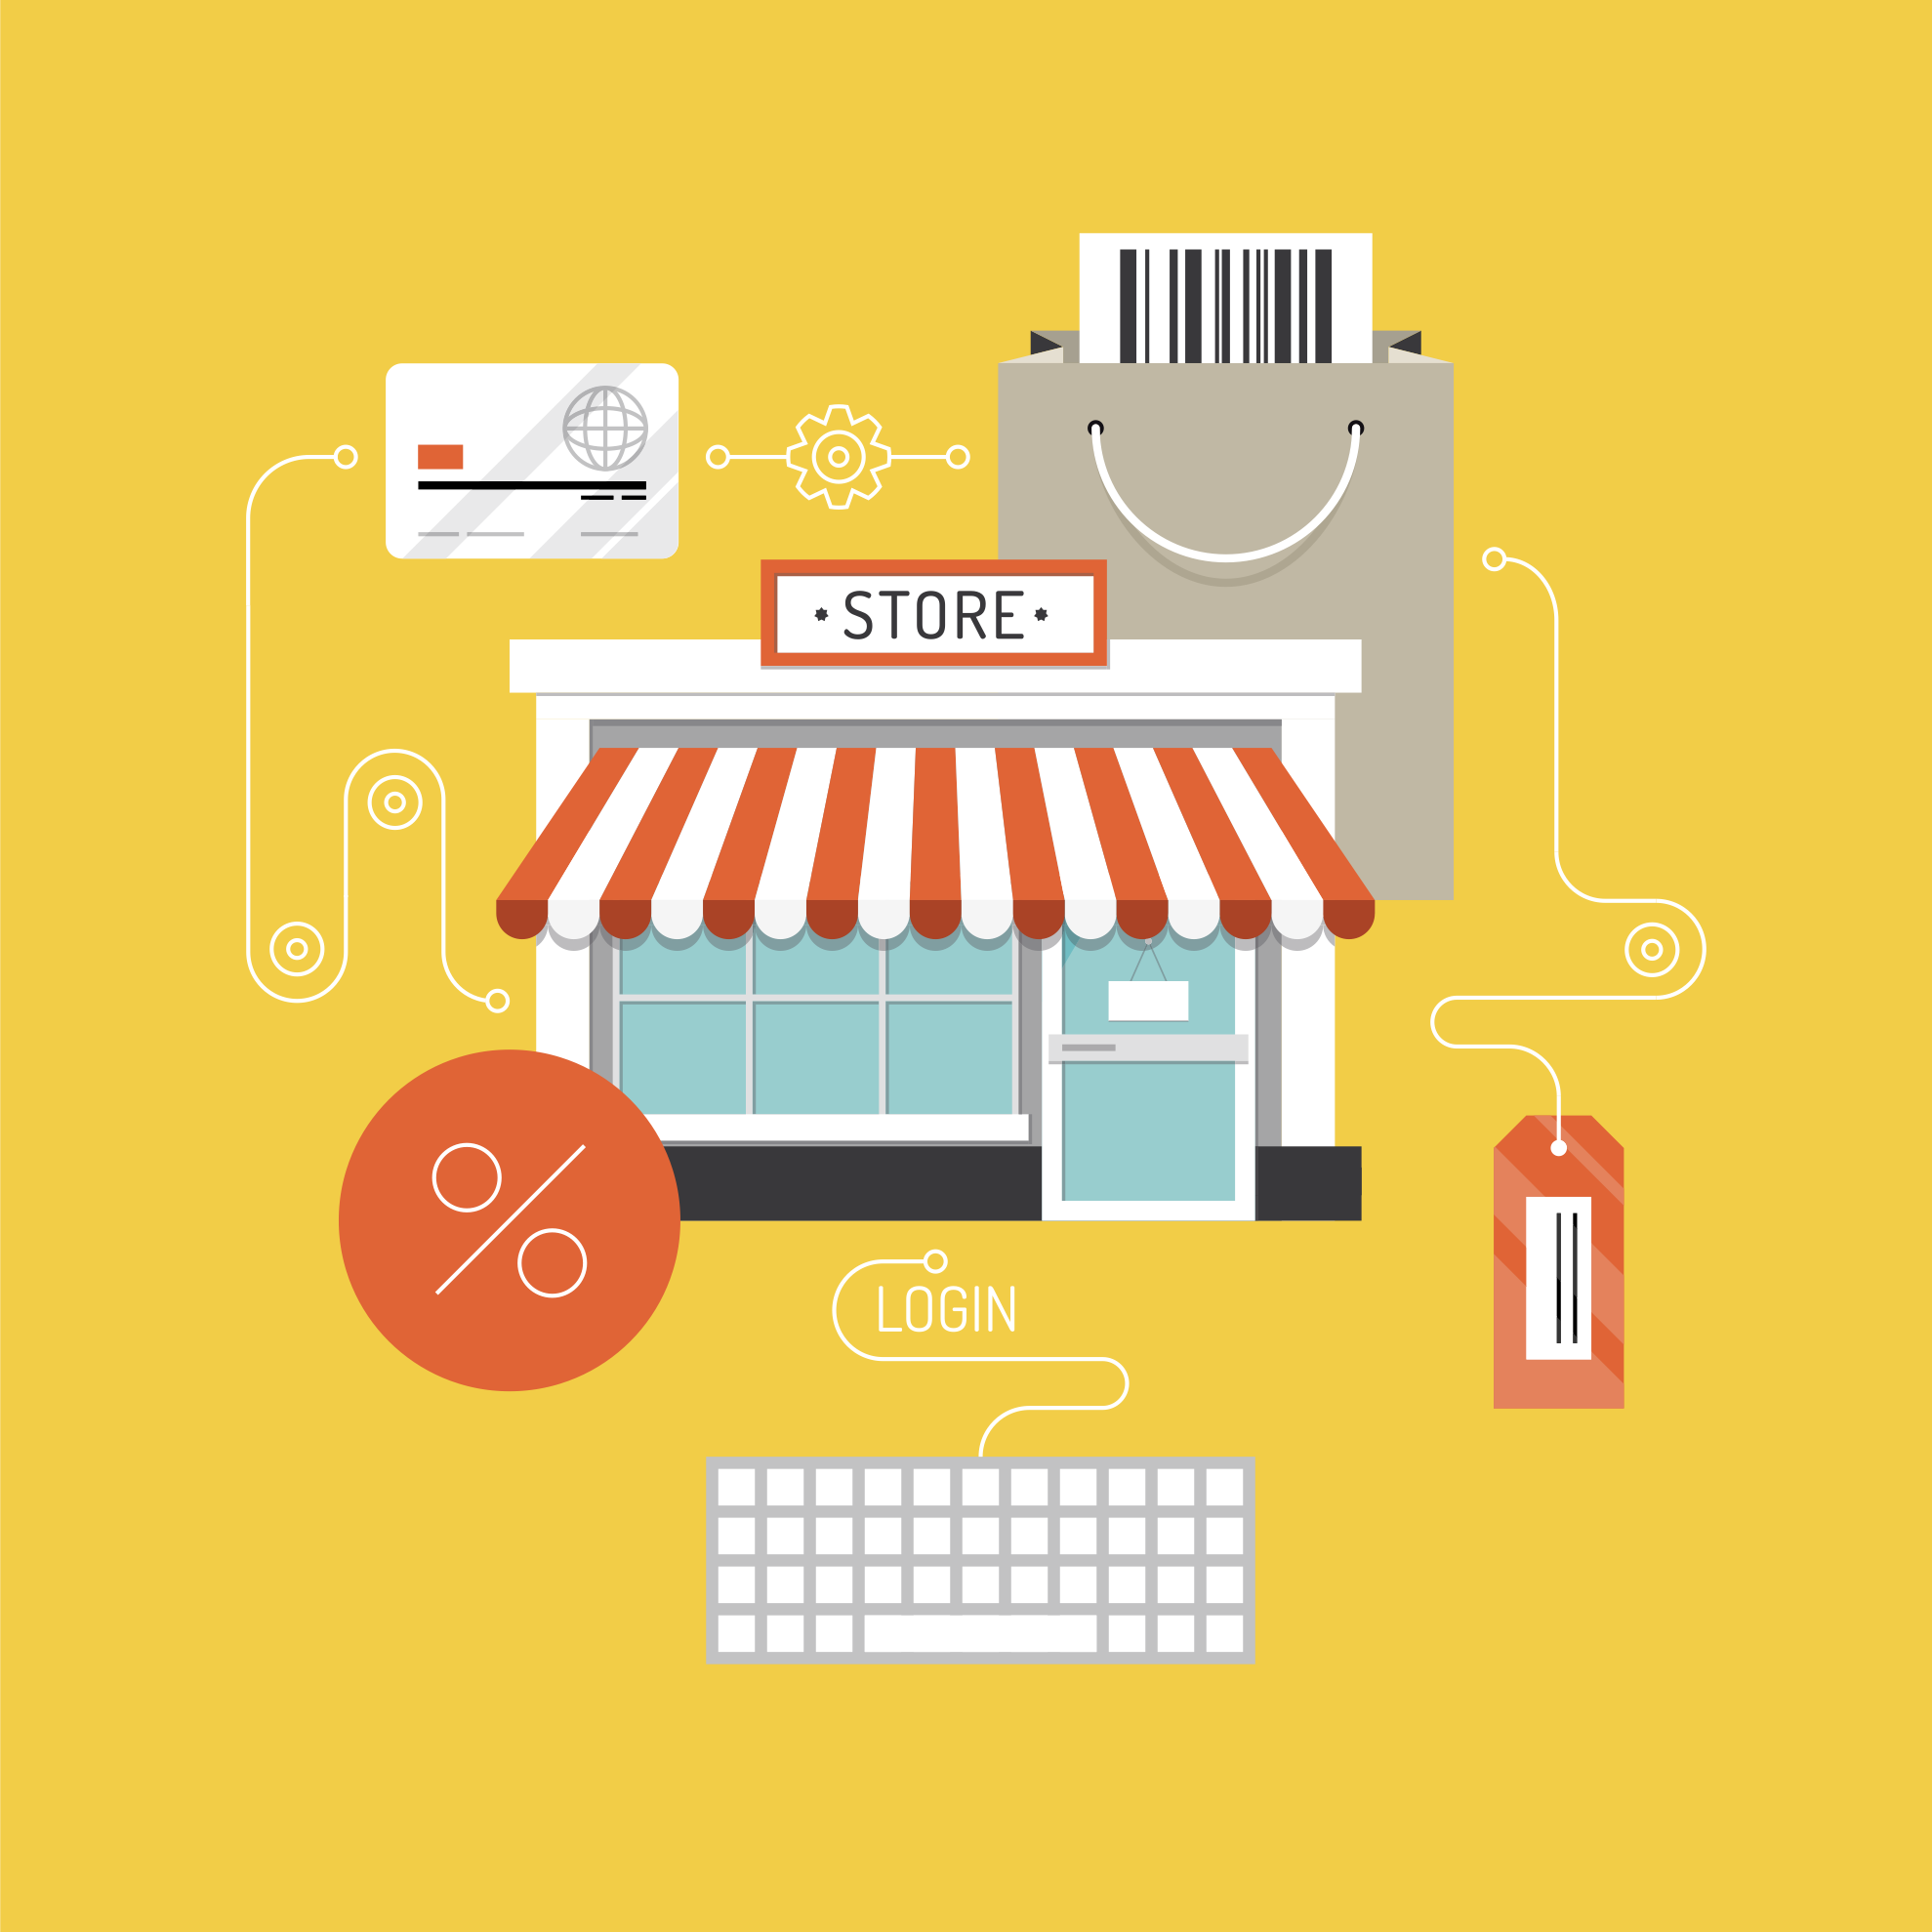 Not Just A Fad – Why You Should Be Using Inbound Marketing For Your Ecommerce Business